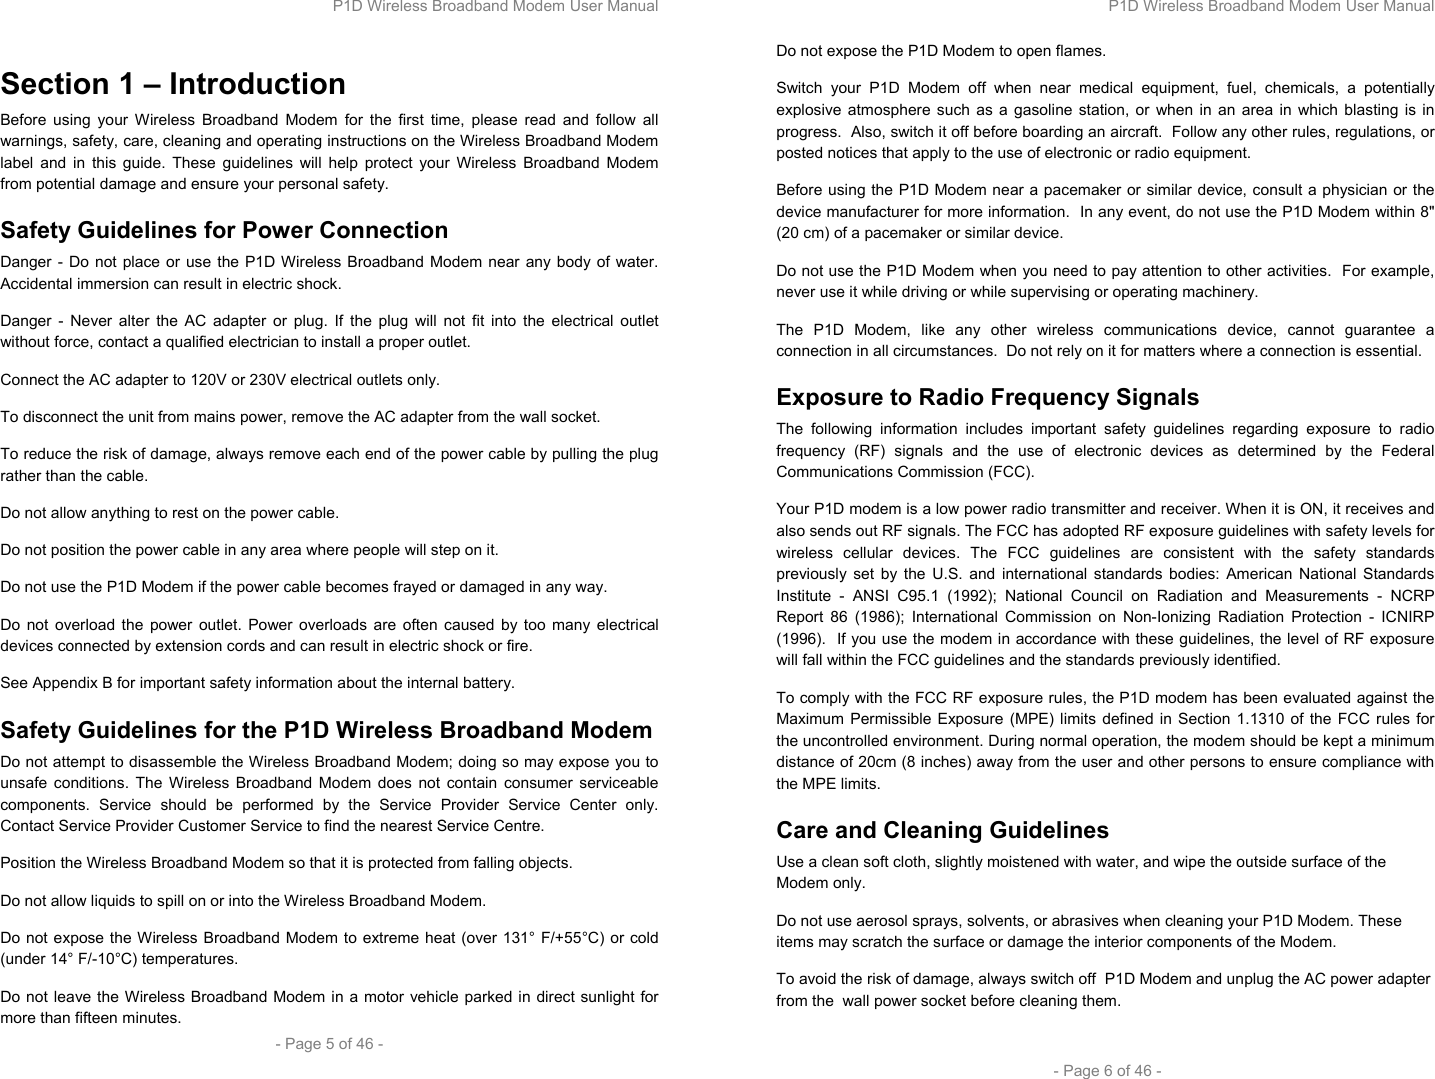 P1D Wireless Broadband Modem User Manual  - Page 5 of 46 -  Section 1 – Introduction Before using your Wireless Broadband Modem for the first time, please read and follow all warnings, safety, care, cleaning and operating instructions on the Wireless Broadband Modem label and in this guide. These guidelines will help protect your Wireless Broadband Modem from potential damage and ensure your personal safety. Safety Guidelines for Power Connection Danger - Do not place or use the P1D Wireless Broadband Modem near any body of water. Accidental immersion can result in electric shock. Danger - Never alter the AC adapter or plug. If the plug will not fit into the electrical outlet without force, contact a qualified electrician to install a proper outlet. Connect the AC adapter to 120V or 230V electrical outlets only. To disconnect the unit from mains power, remove the AC adapter from the wall socket. To reduce the risk of damage, always remove each end of the power cable by pulling the plug rather than the cable. Do not allow anything to rest on the power cable. Do not position the power cable in any area where people will step on it. Do not use the P1D Modem if the power cable becomes frayed or damaged in any way.  Do not overload the power outlet. Power overloads are often caused by too many electrical devices connected by extension cords and can result in electric shock or fire. See Appendix B for important safety information about the internal battery. Safety Guidelines for the P1D Wireless Broadband Modem  Do not attempt to disassemble the Wireless Broadband Modem; doing so may expose you to unsafe conditions. The Wireless Broadband Modem does not contain consumer serviceable components. Service should be performed by the Service Provider Service Center only. Contact Service Provider Customer Service to find the nearest Service Centre. Position the Wireless Broadband Modem so that it is protected from falling objects. Do not allow liquids to spill on or into the Wireless Broadband Modem. Do not expose the Wireless Broadband Modem to extreme heat (over 131° F/+55°C) or cold (under 14° F/-10°C) temperatures. Do not leave the Wireless Broadband Modem in a motor vehicle parked in direct sunlight for more than fifteen minutes. P1D Wireless Broadband Modem User Manual  - Page 6 of 46 - Do not expose the P1D Modem to open flames. Switch your P1D Modem off when near medical equipment, fuel, chemicals, a potentially explosive atmosphere such as a gasoline station, or when in an area in which blasting is in progress.  Also, switch it off before boarding an aircraft.  Follow any other rules, regulations, or posted notices that apply to the use of electronic or radio equipment. Before using the P1D Modem near a pacemaker or similar device, consult a physician or the device manufacturer for more information.  In any event, do not use the P1D Modem within 8&quot; (20 cm) of a pacemaker or similar device.  Do not use the P1D Modem when you need to pay attention to other activities.  For example, never use it while driving or while supervising or operating machinery.  The P1D Modem, like any other wireless communications device, cannot guarantee a connection in all circumstances.  Do not rely on it for matters where a connection is essential. Exposure to Radio Frequency Signals The following information includes important safety guidelines regarding exposure to radio frequency (RF) signals and the use of electronic devices as determined by the Federal Communications Commission (FCC).  Your P1D modem is a low power radio transmitter and receiver. When it is ON, it receives and also sends out RF signals. The FCC has adopted RF exposure guidelines with safety levels for wireless cellular devices. The FCC guidelines are consistent with the safety standards previously set by the U.S. and international standards bodies: American National Standards Institute - ANSI C95.1 (1992); National Council on Radiation and Measurements - NCRP Report 86 (1986); International Commission on Non-Ionizing Radiation Protection - ICNIRP (1996).  If you use the modem in accordance with these guidelines, the level of RF exposure will fall within the FCC guidelines and the standards previously identified. To comply with the FCC RF exposure rules, the P1D modem has been evaluated against the Maximum Permissible Exposure (MPE) limits defined in Section 1.1310 of the FCC rules for the uncontrolled environment. During normal operation, the modem should be kept a minimum distance of 20cm (8 inches) away from the user and other persons to ensure compliance with the MPE limits. Care and Cleaning Guidelines Use a clean soft cloth, slightly moistened with water, and wipe the outside surface of the Modem only. Do not use aerosol sprays, solvents, or abrasives when cleaning your P1D Modem. These items may scratch the surface or damage the interior components of the Modem. To avoid the risk of damage, always switch off  P1D Modem and unplug the AC power adapter from the  wall power socket before cleaning them.  